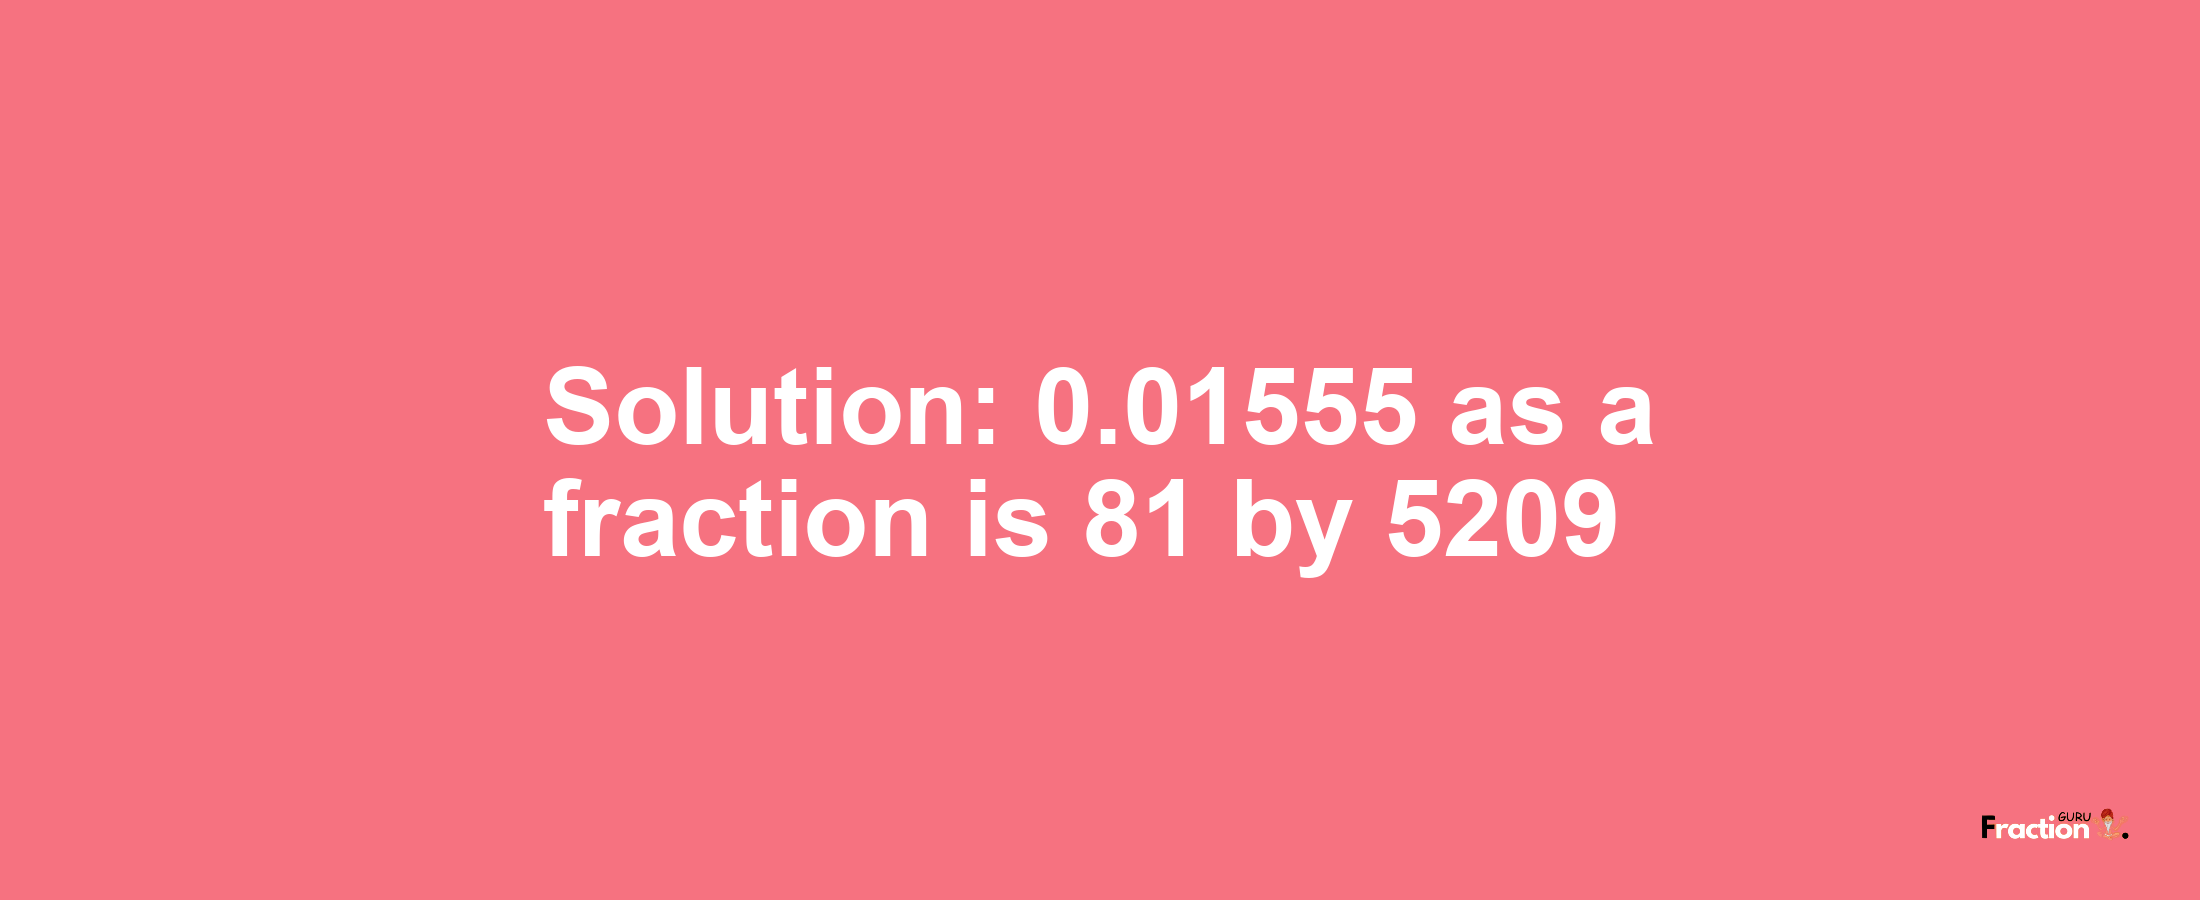 Solution:0.01555 as a fraction is 81/5209